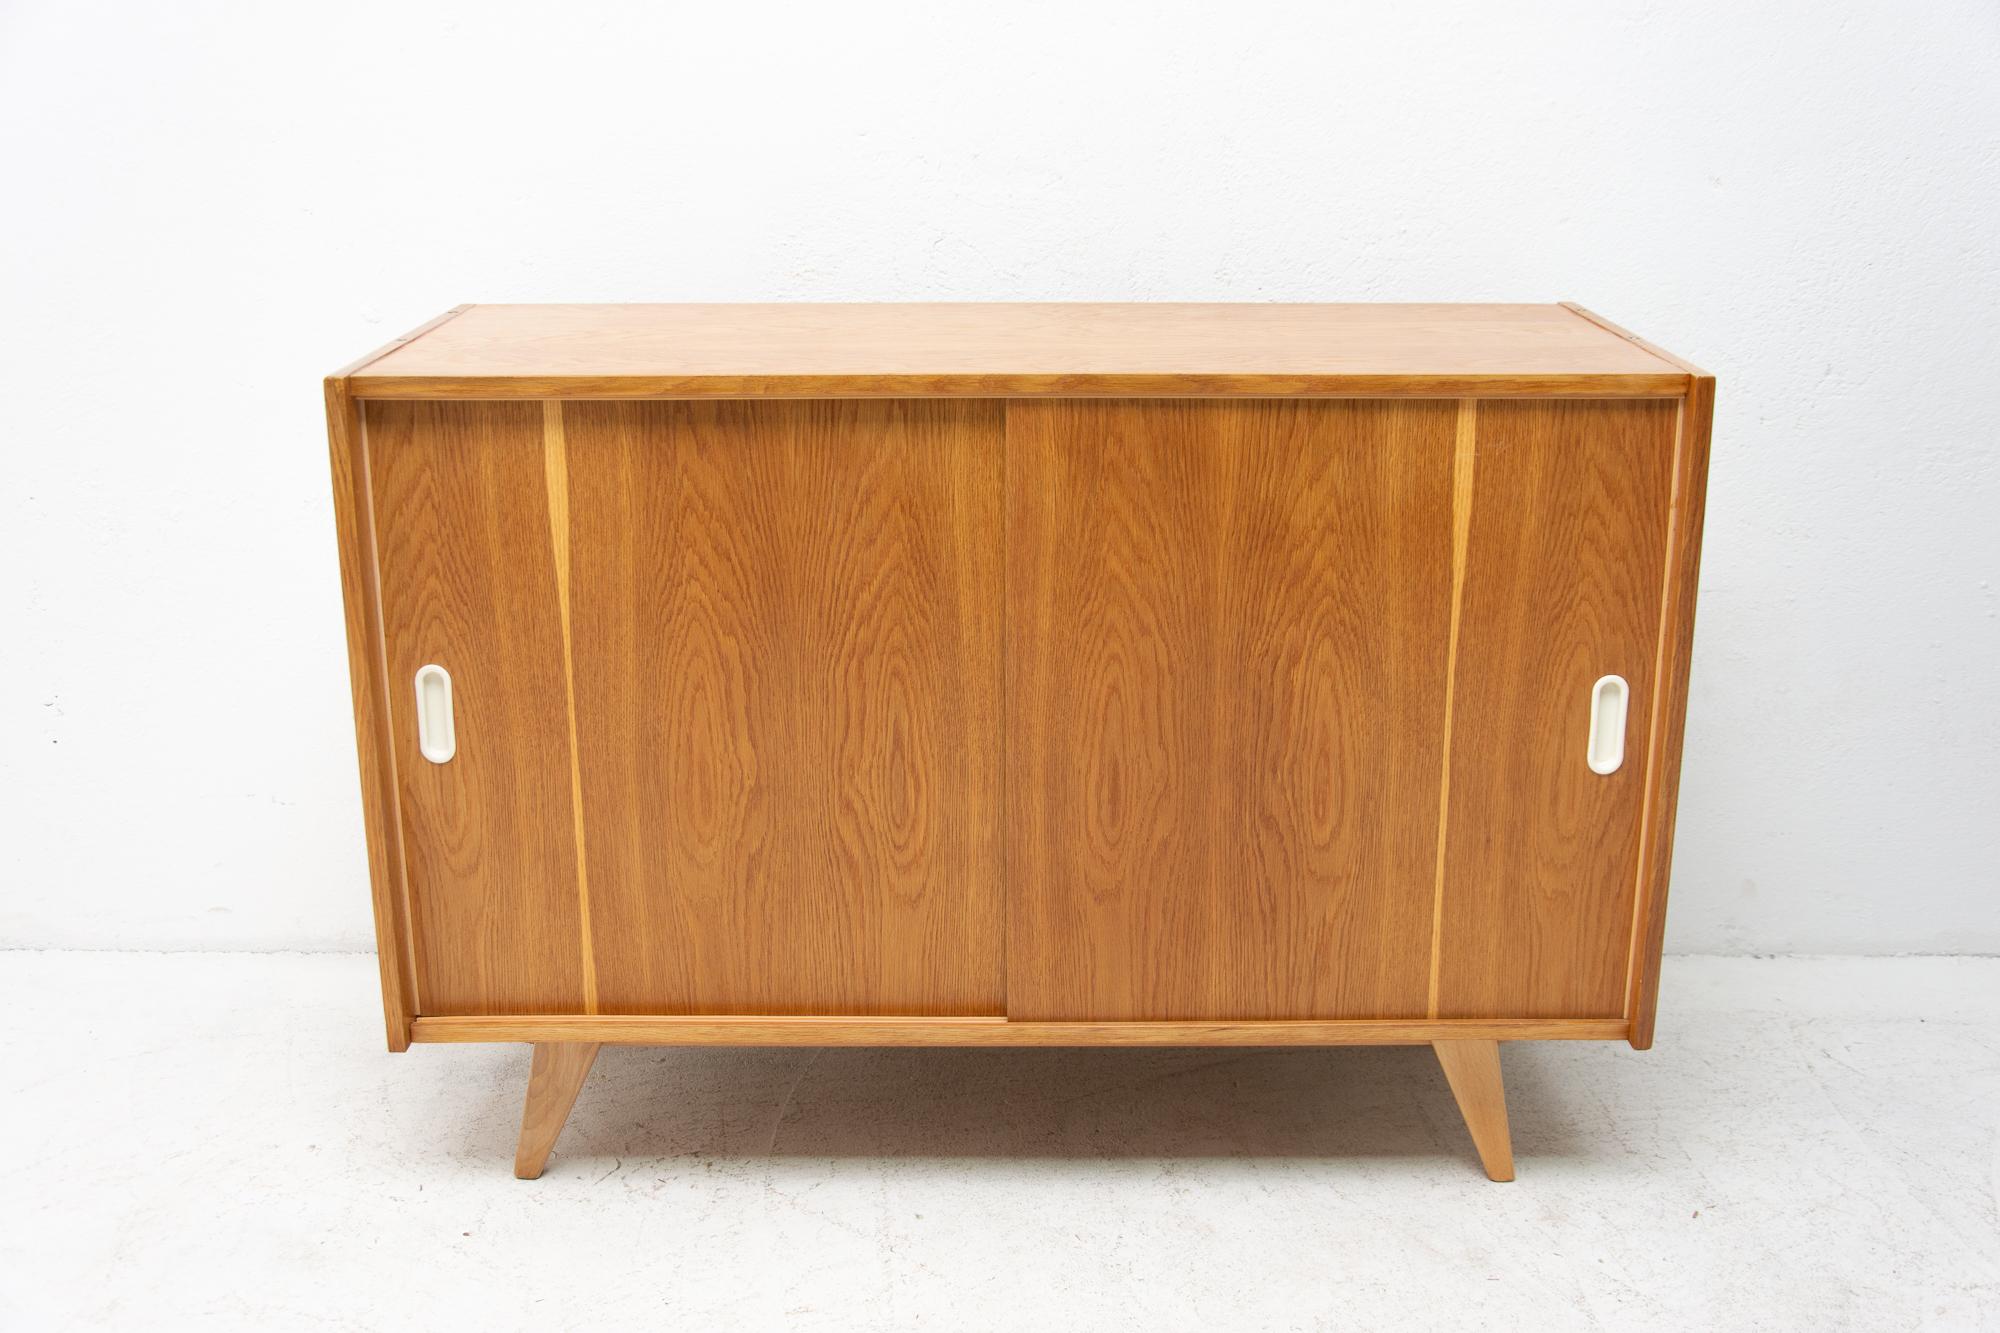 Midcentury sideboard with sliding doors and one long shelf inside, designed by Jirí Jiroutek in the 1960s. It´s made of oakwood. In excellent condition, fully refurbished.